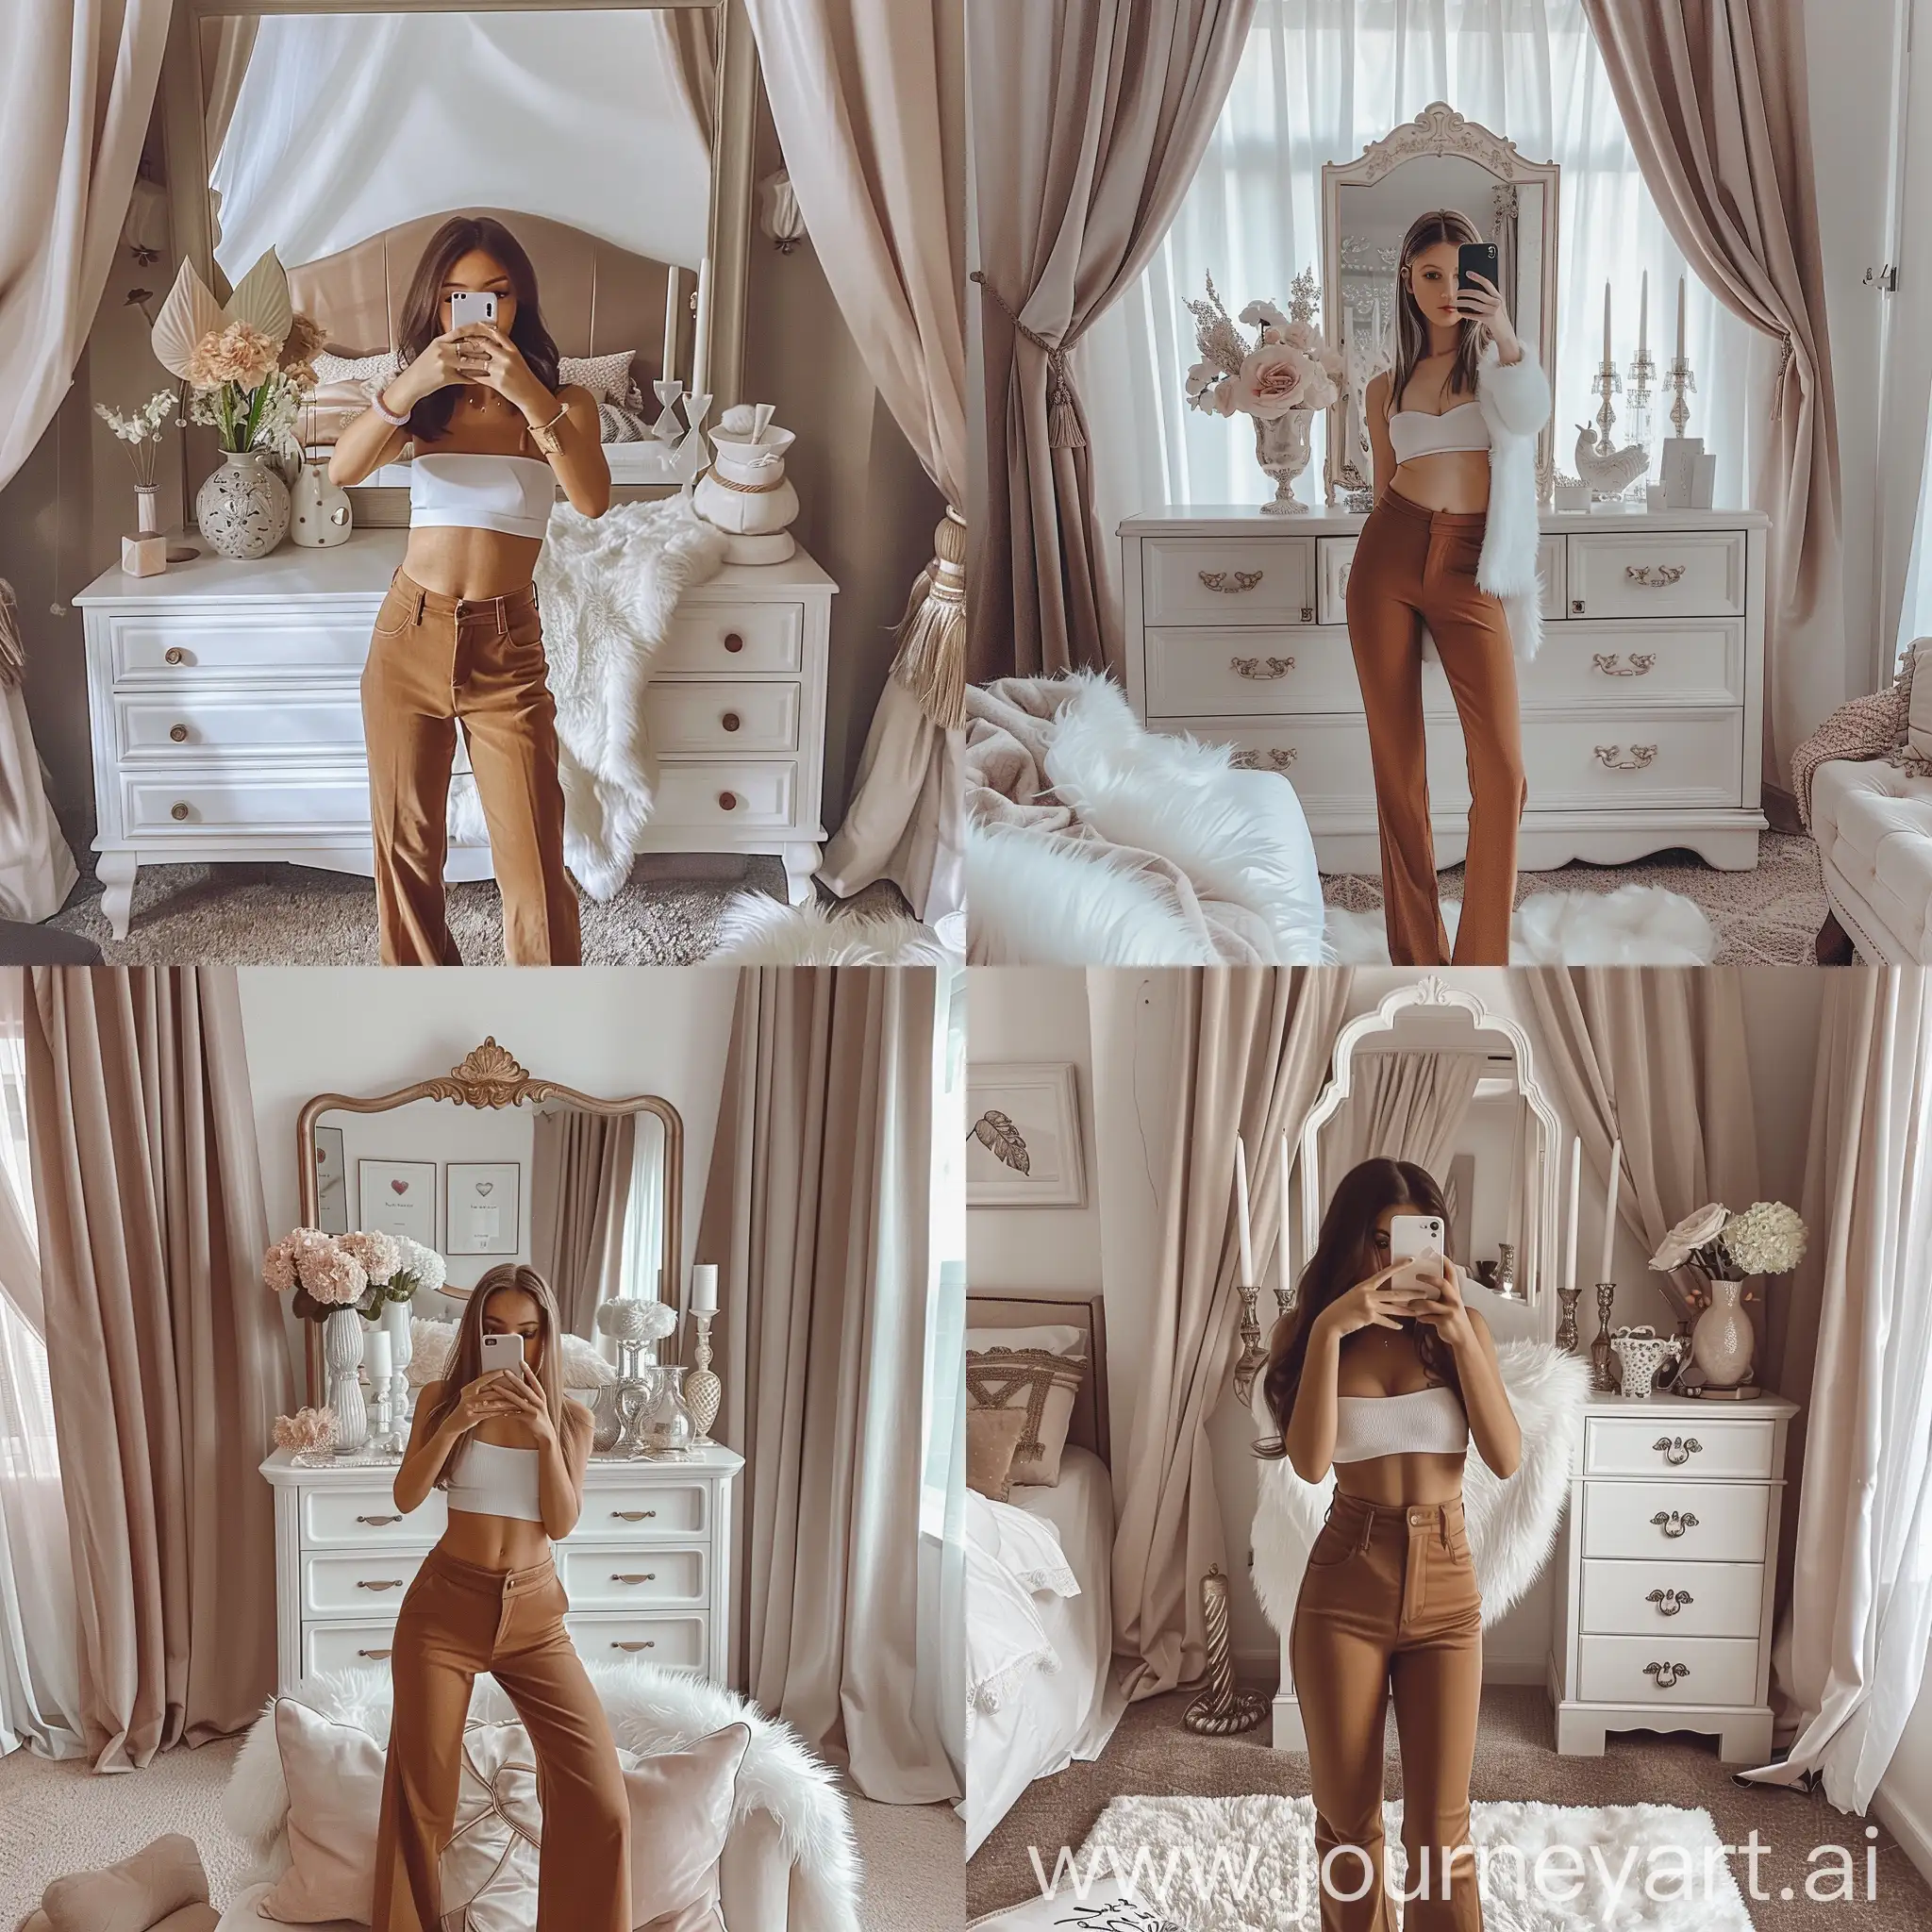 A girl in a stylishly decorated room poses in front of a mirror and takes a selfie. He's wearing a chic outfit: high-waisted caramel trousers and a tight white strapless top. The room is decorated with an elegant white chest of drawers with decorative items such as a vase of pale pink flowers and a pair of elegant candlesticks with white candles. Behind the figure is a cozy bed with decorative pillows, and a bold white fur blanket is casually draped over it, giving the room a sense of sophistication and coziness. The curtains are opened to let in natural light, making the room feel bright and airy.